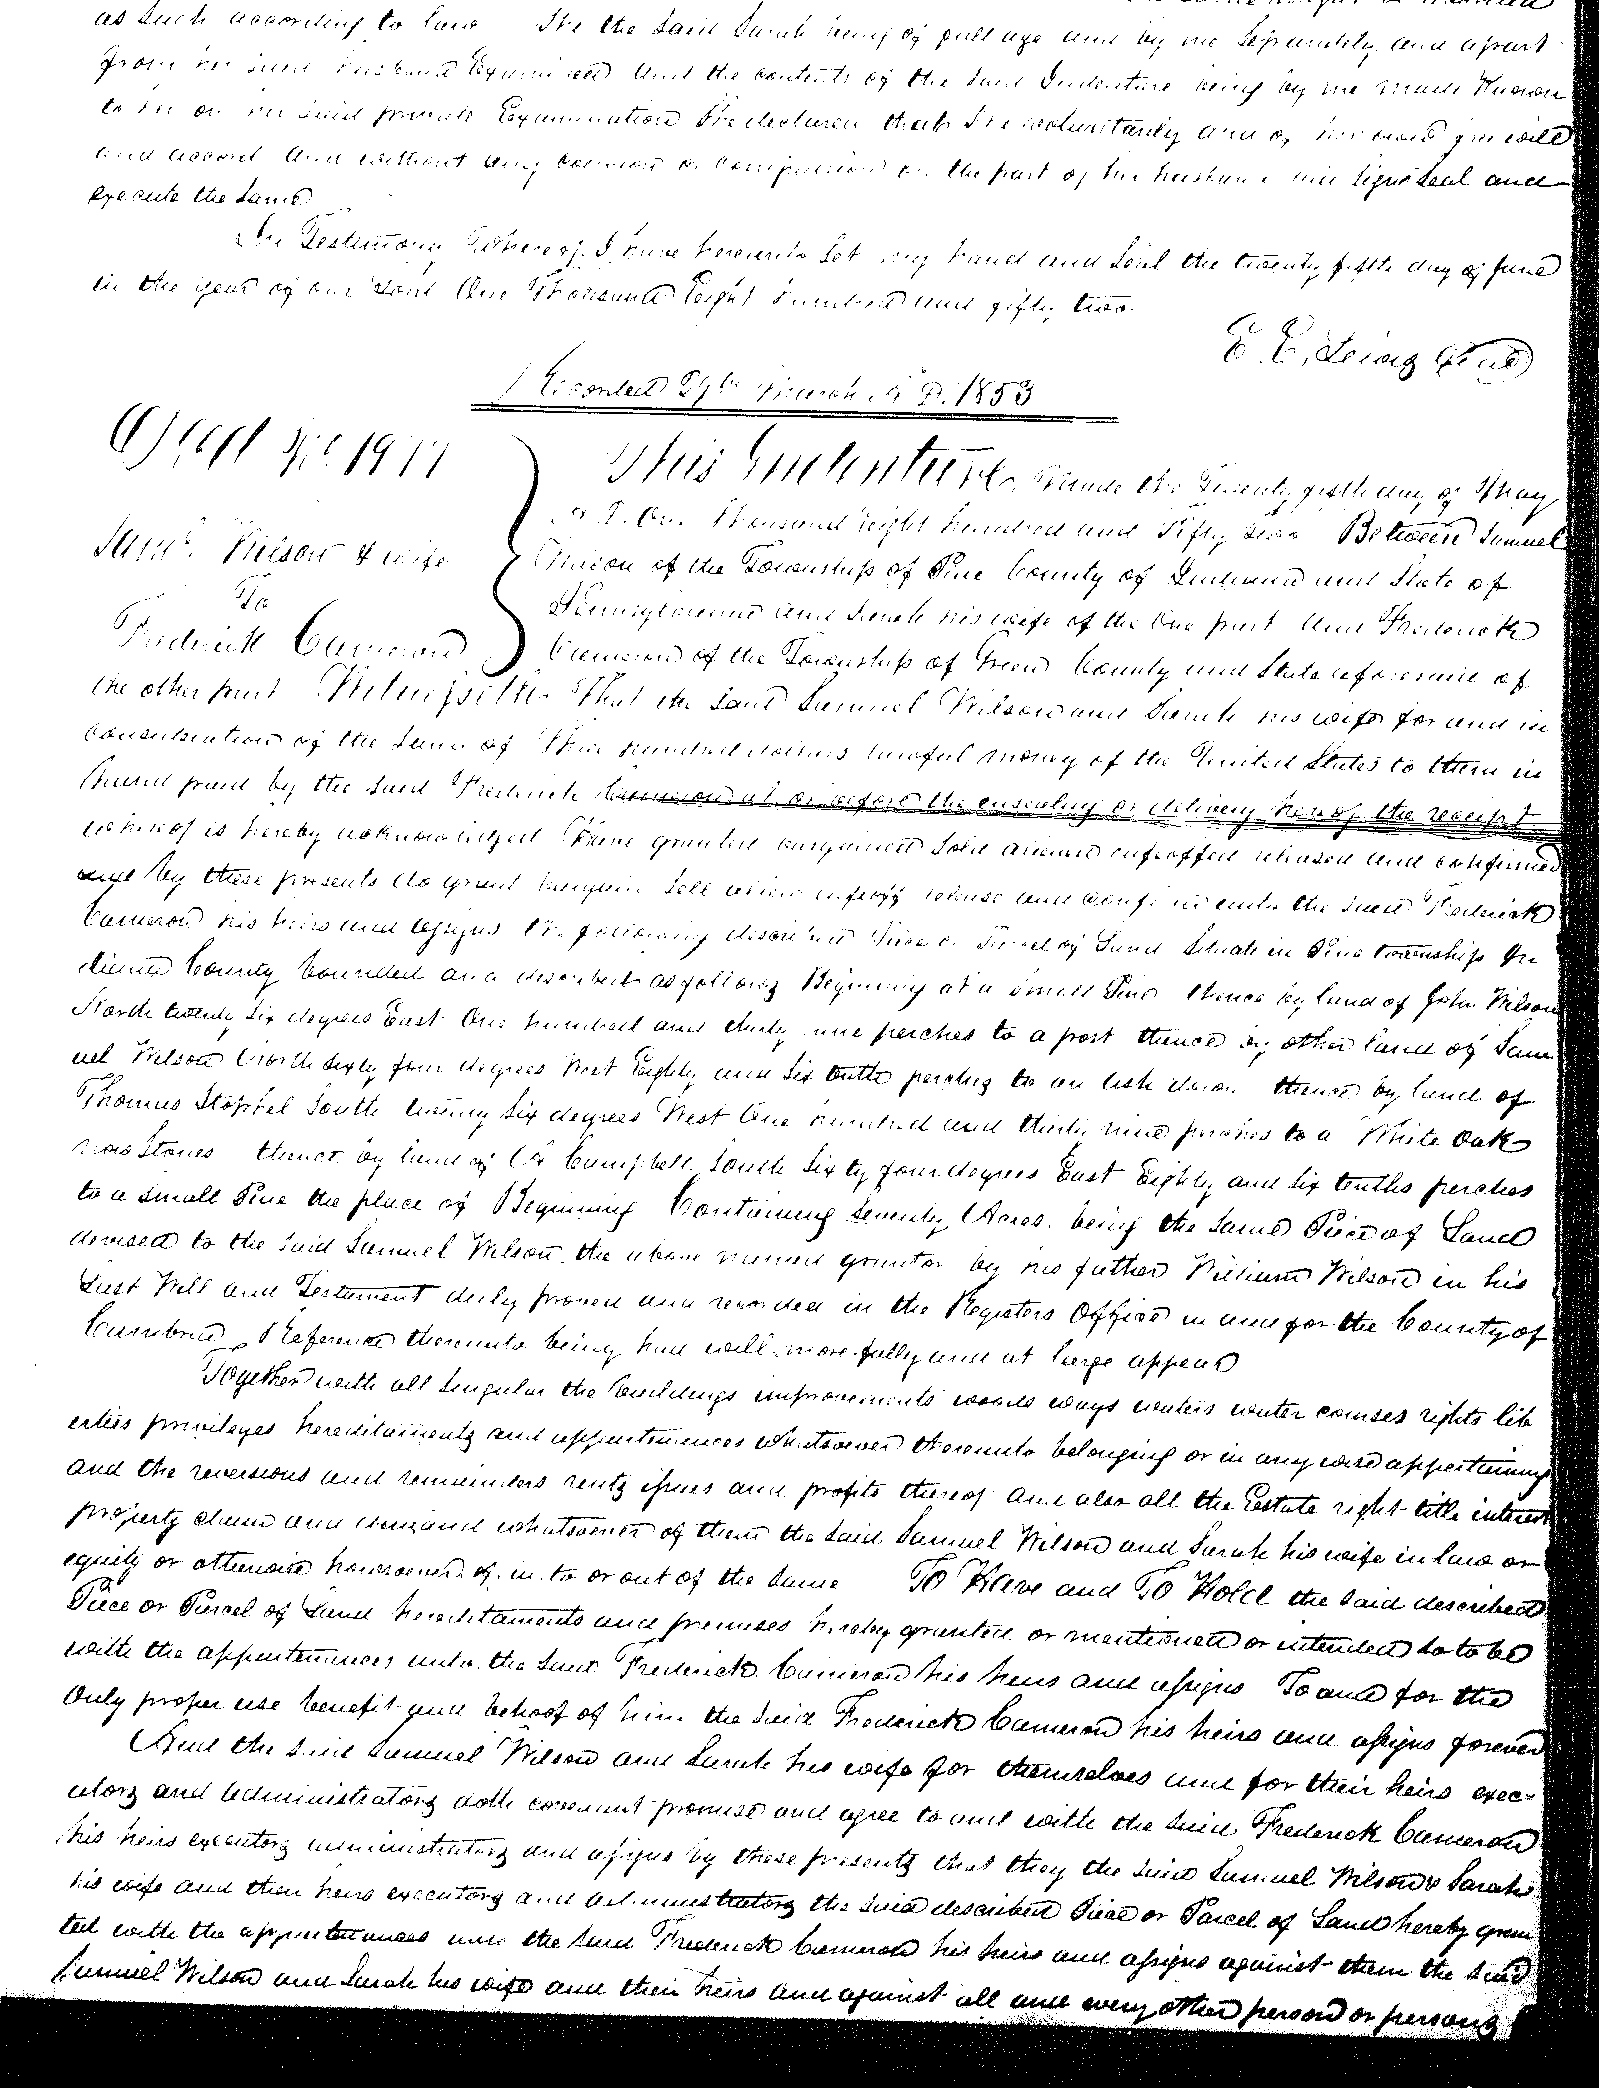 Deed of Sale from Samuel Wilson to Frederick Cameron - 1853 (Part 1)